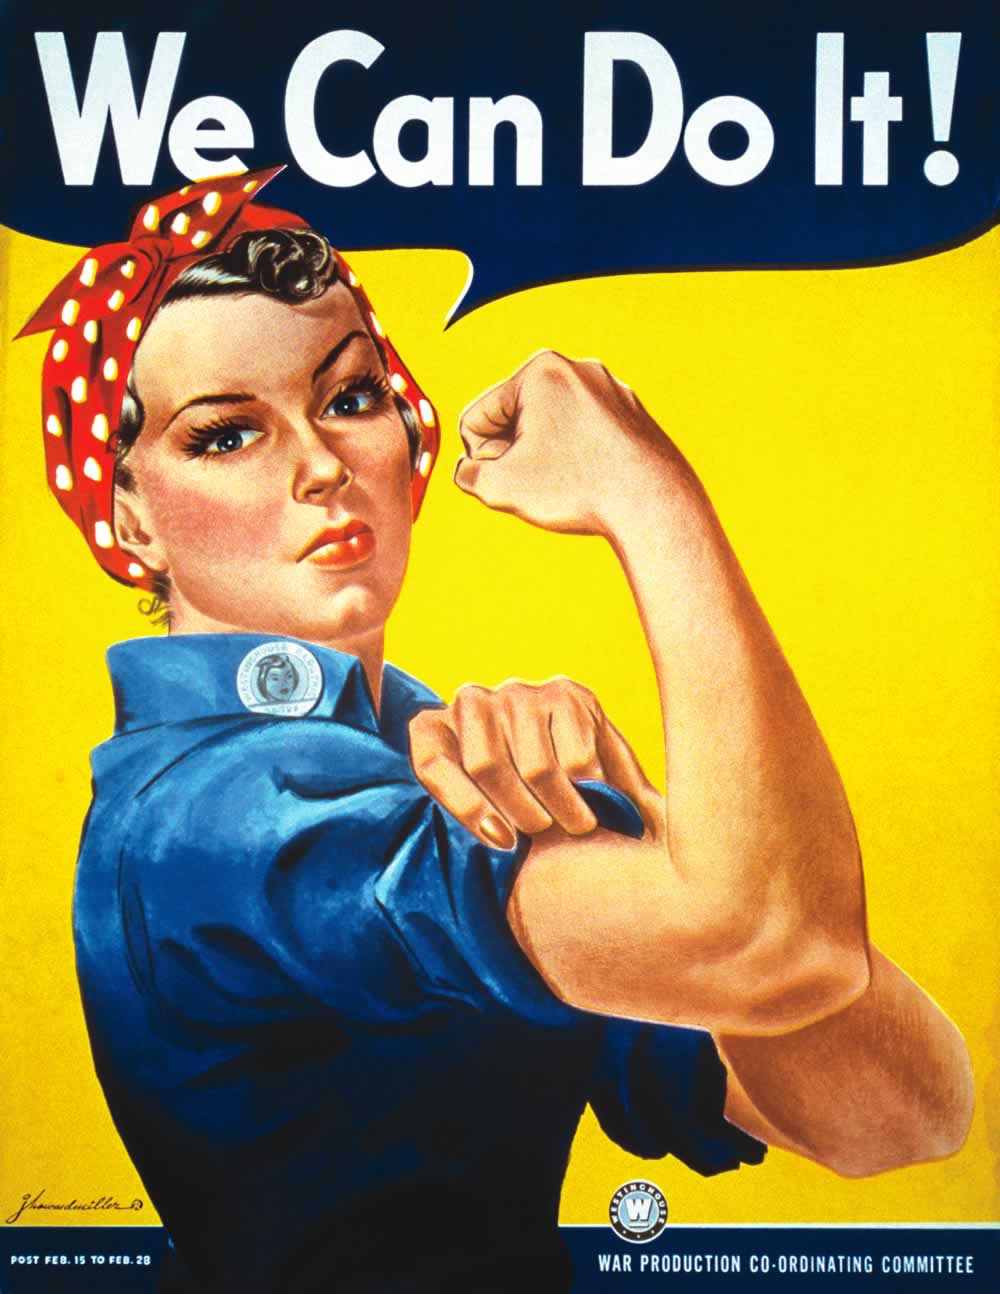 The "We Can Do It!" poster by artist J. Howard Miller.